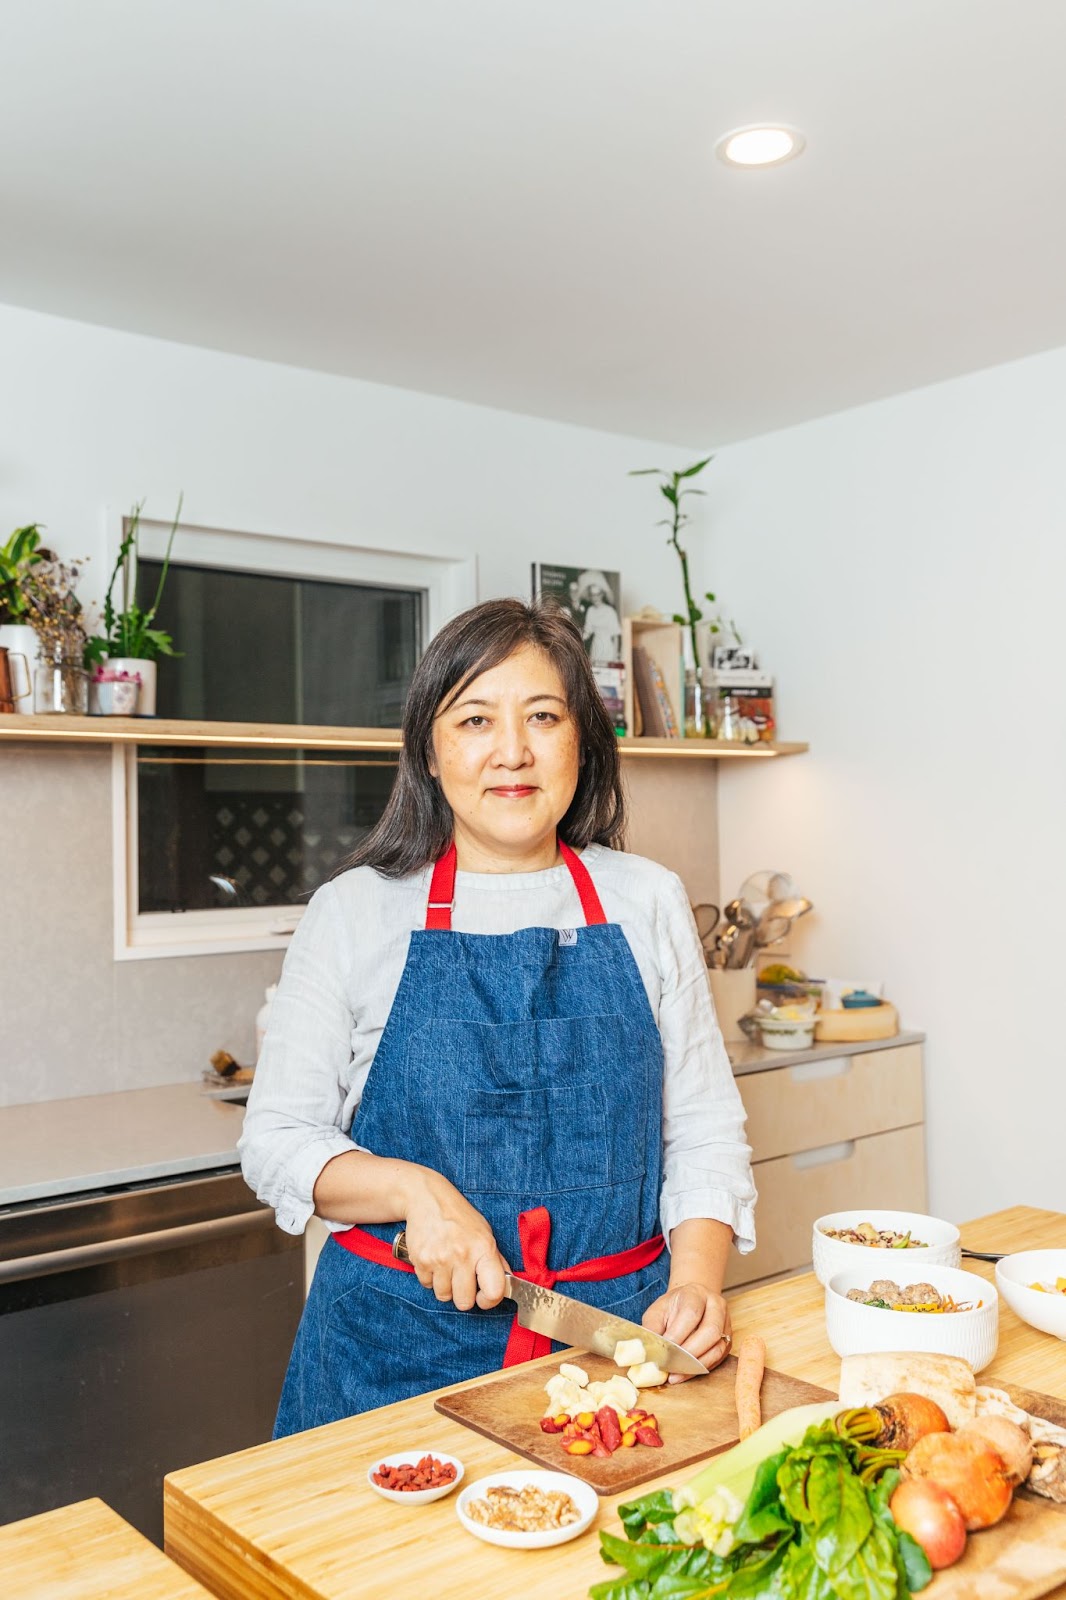 Reclaiming Chinese postpartum traditions with Feeding Mama. Image of Mona Stilwell, founder of Feeding Mama in a kitchen wearing an apron, and holding a knife to a cutting board with ingredients found in Feeding Mama dishes.